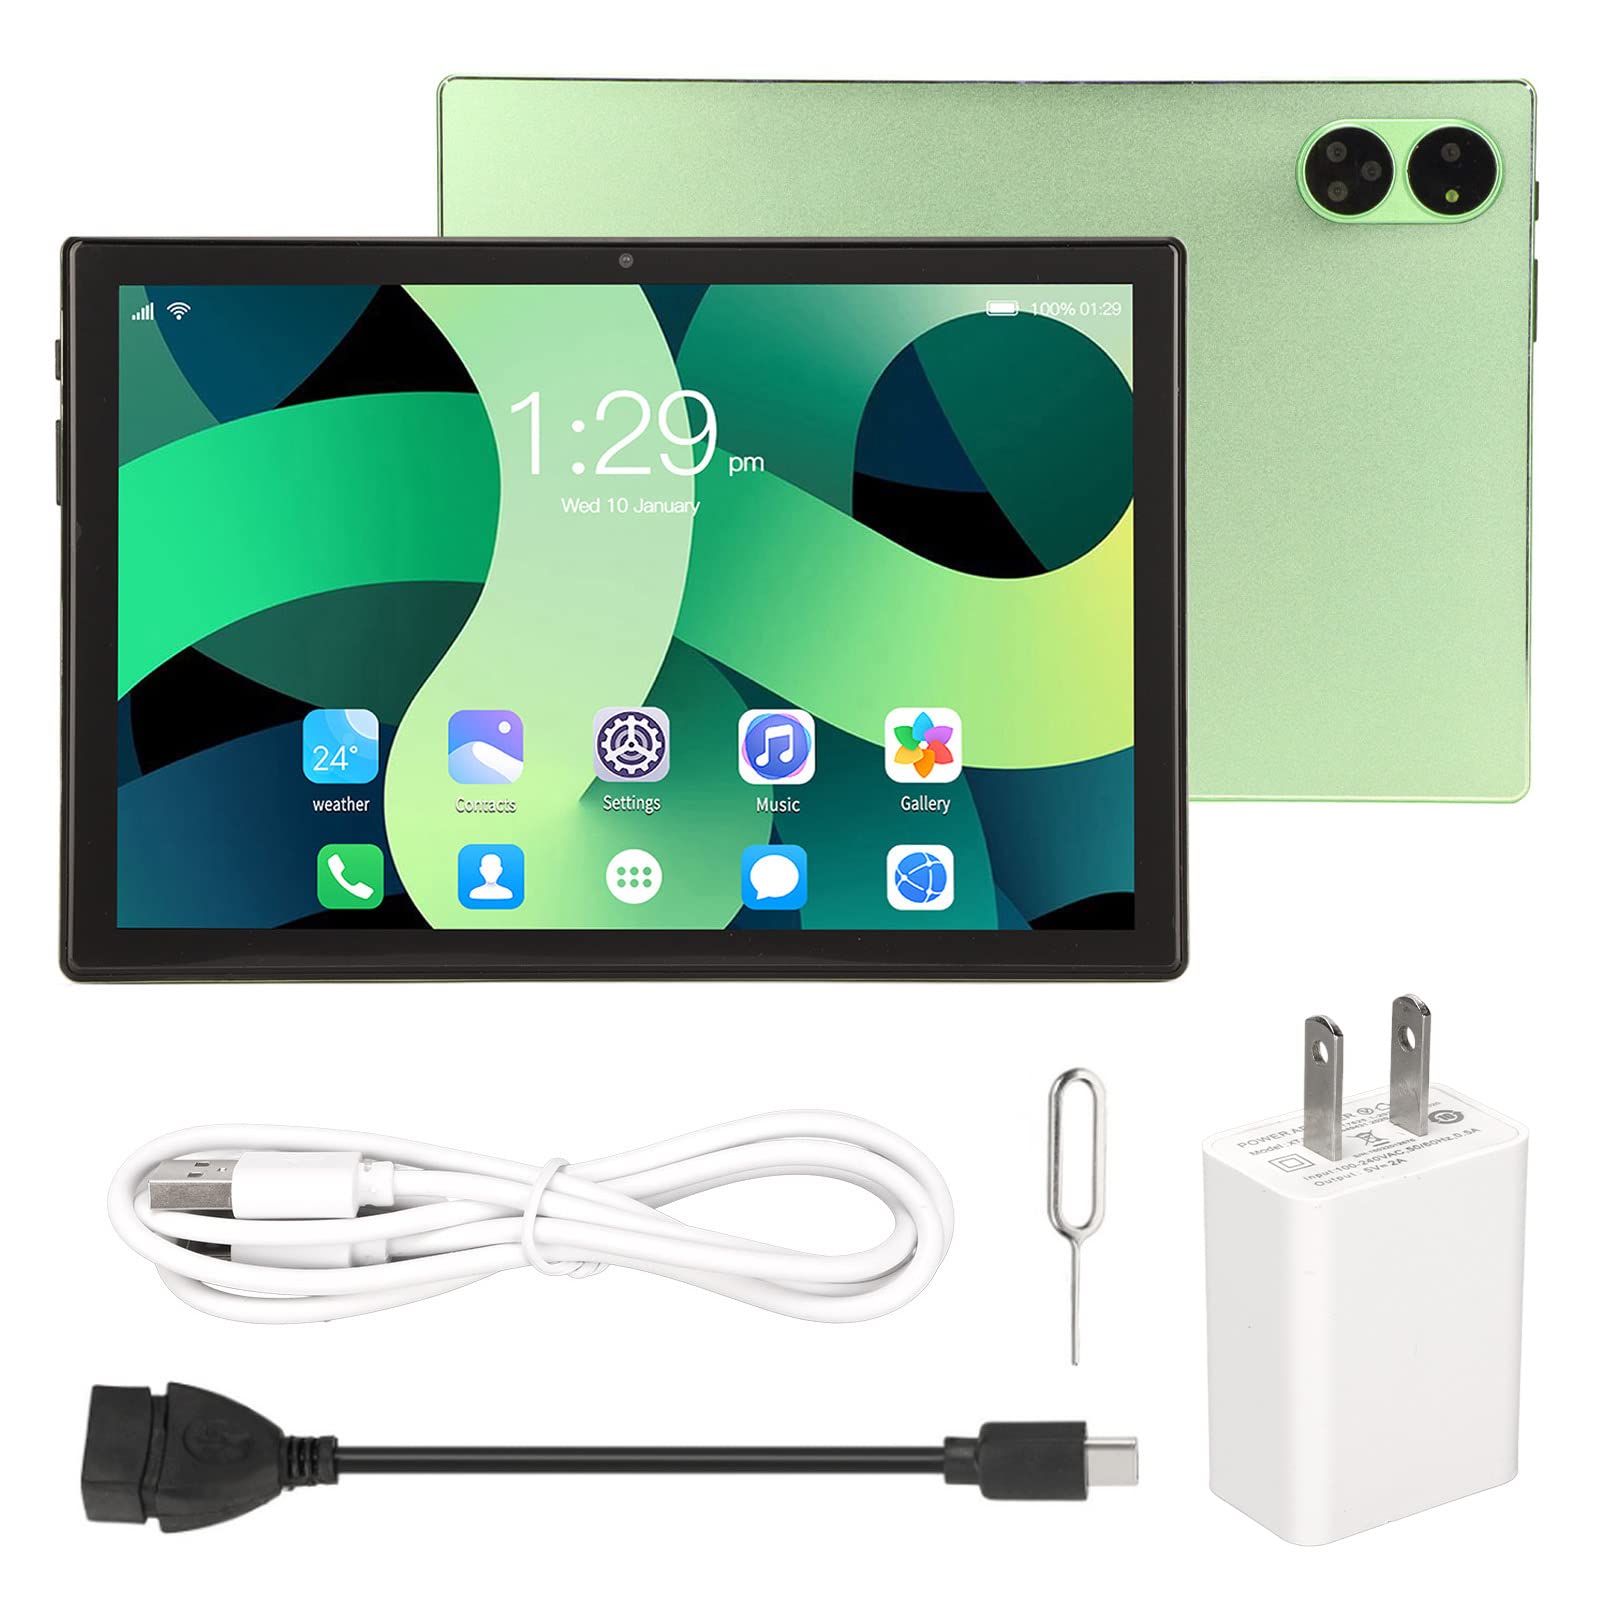 Tablet 10.1 Inch Android 11 Tablets, 4GB RAM 128GB ROM Octa Core Tablets with Dual Cameras, 128GB Expandable, Dual Card Slot Dual WIFI, Large Capacity Battery, 5MP Front and 8MP Rear Cameras(Green)